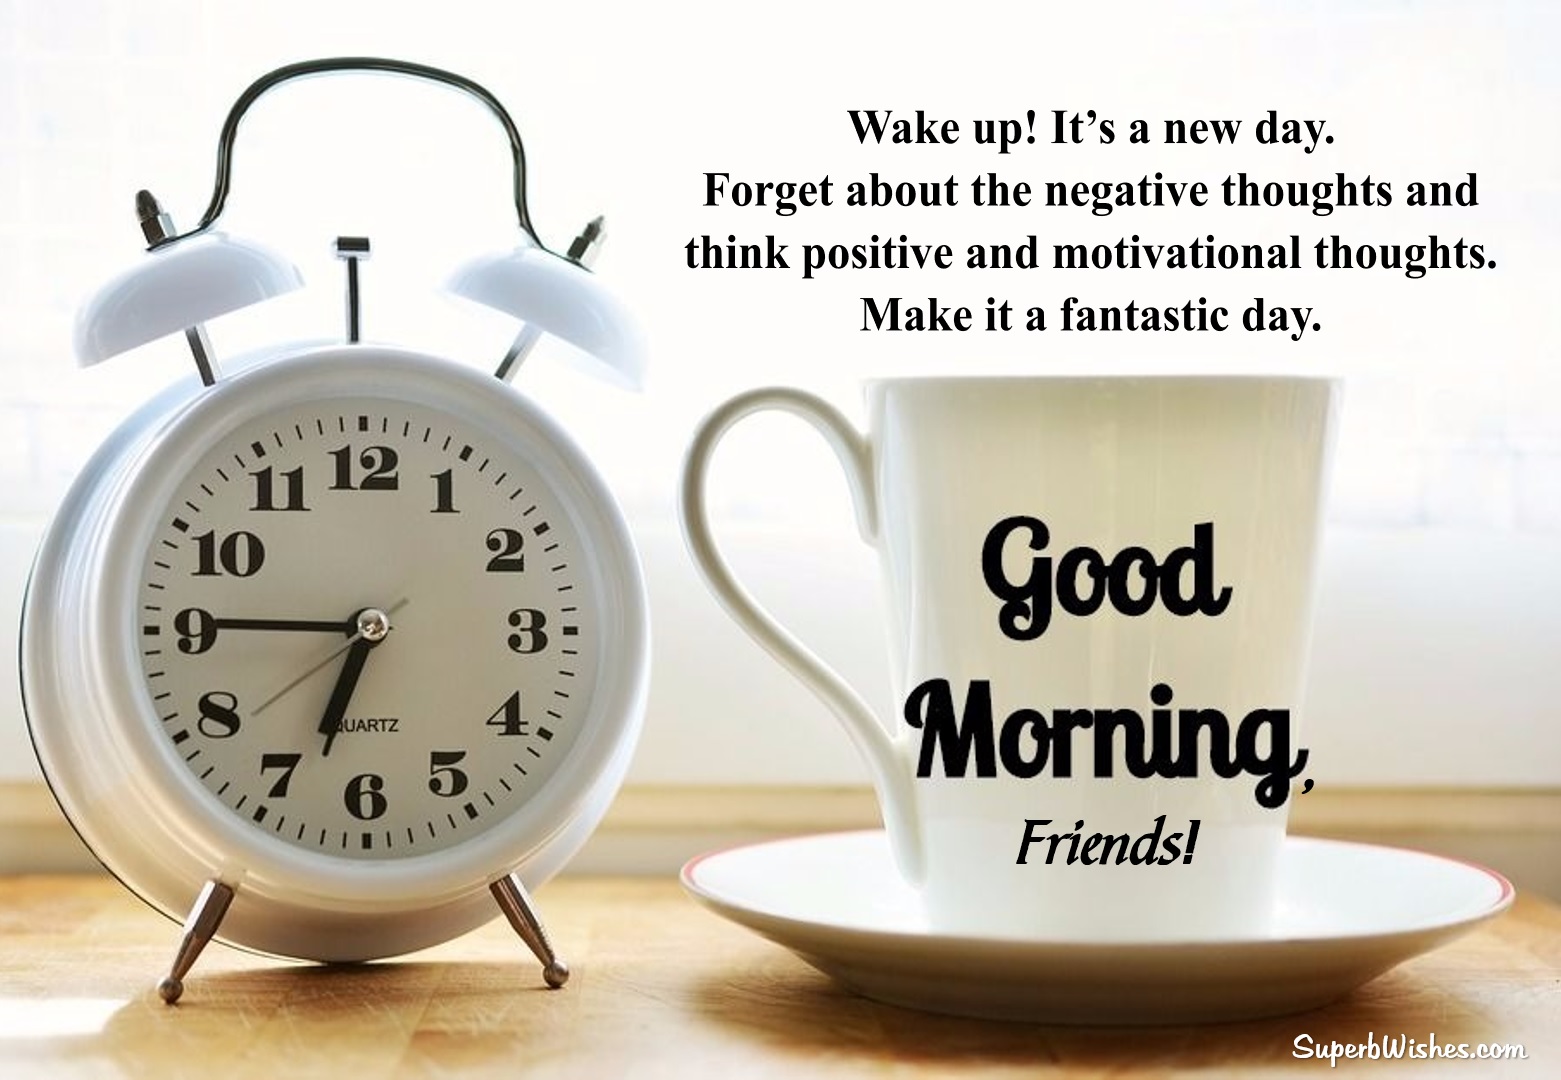 Good Morning Wishes For Friends Images - Think Positive | SuperbWishes